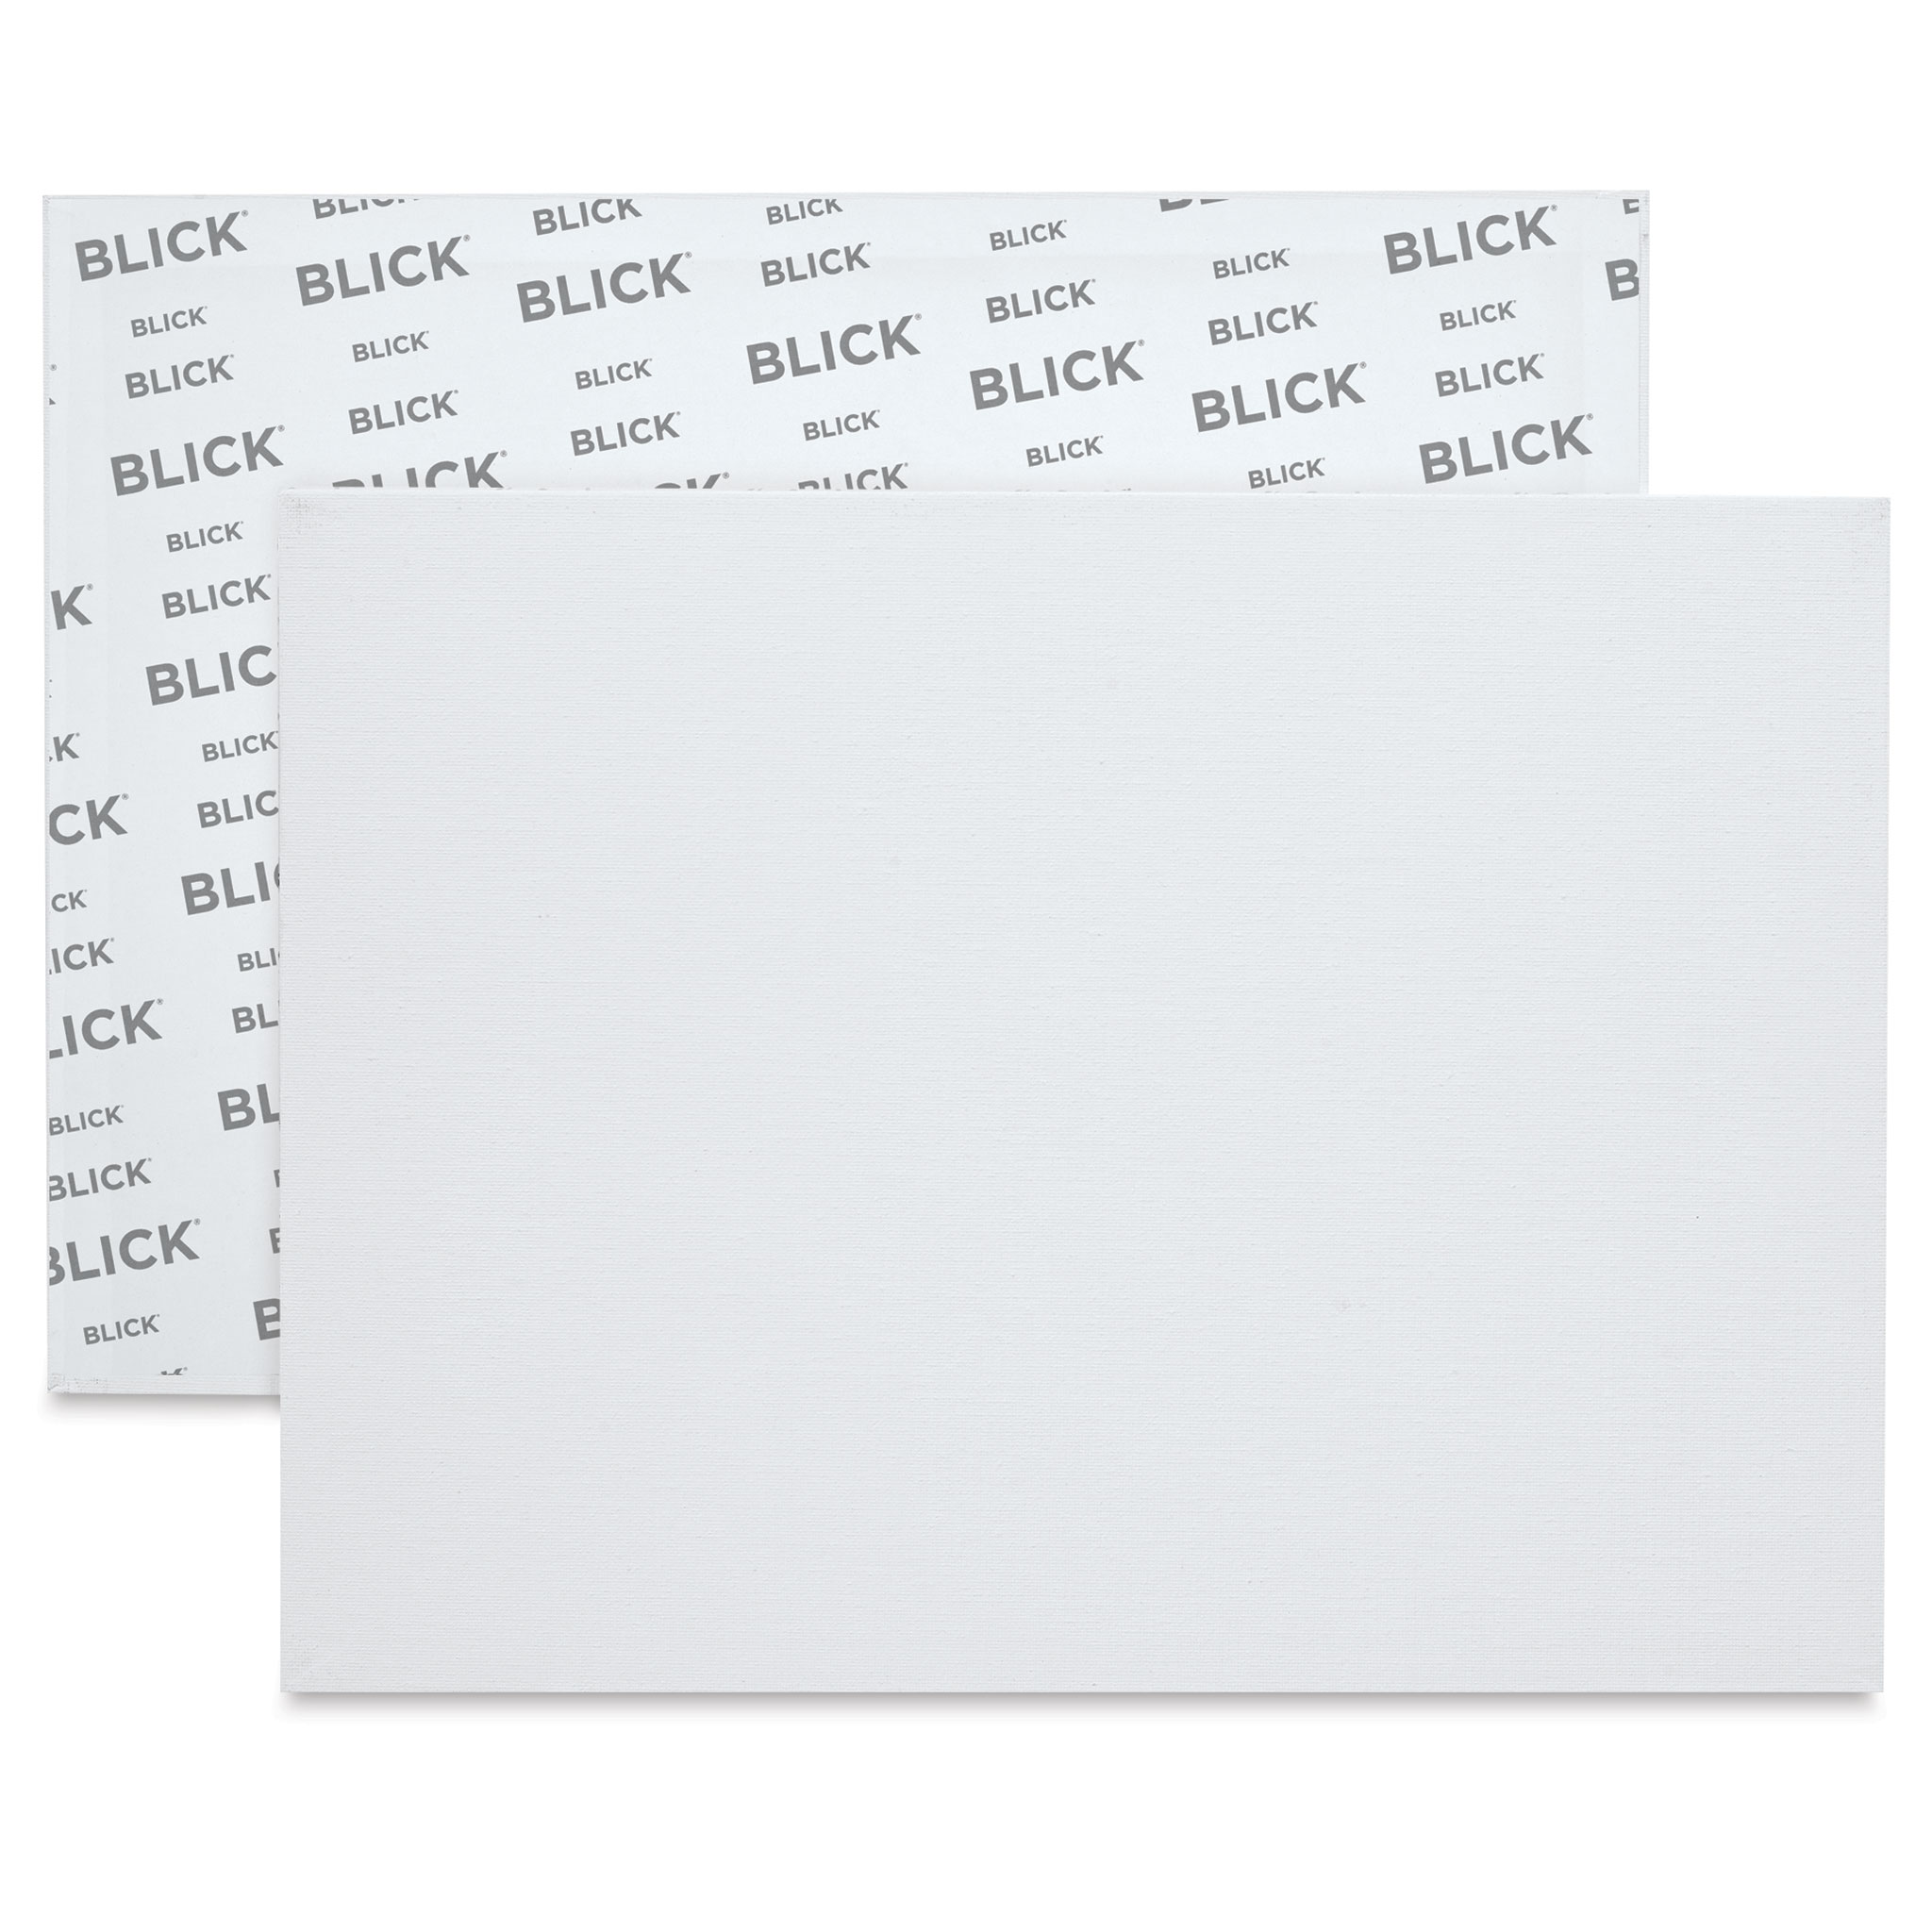 Blick Super Value Canvas Pack - 12 inch x 16 inch, Pkg of 6